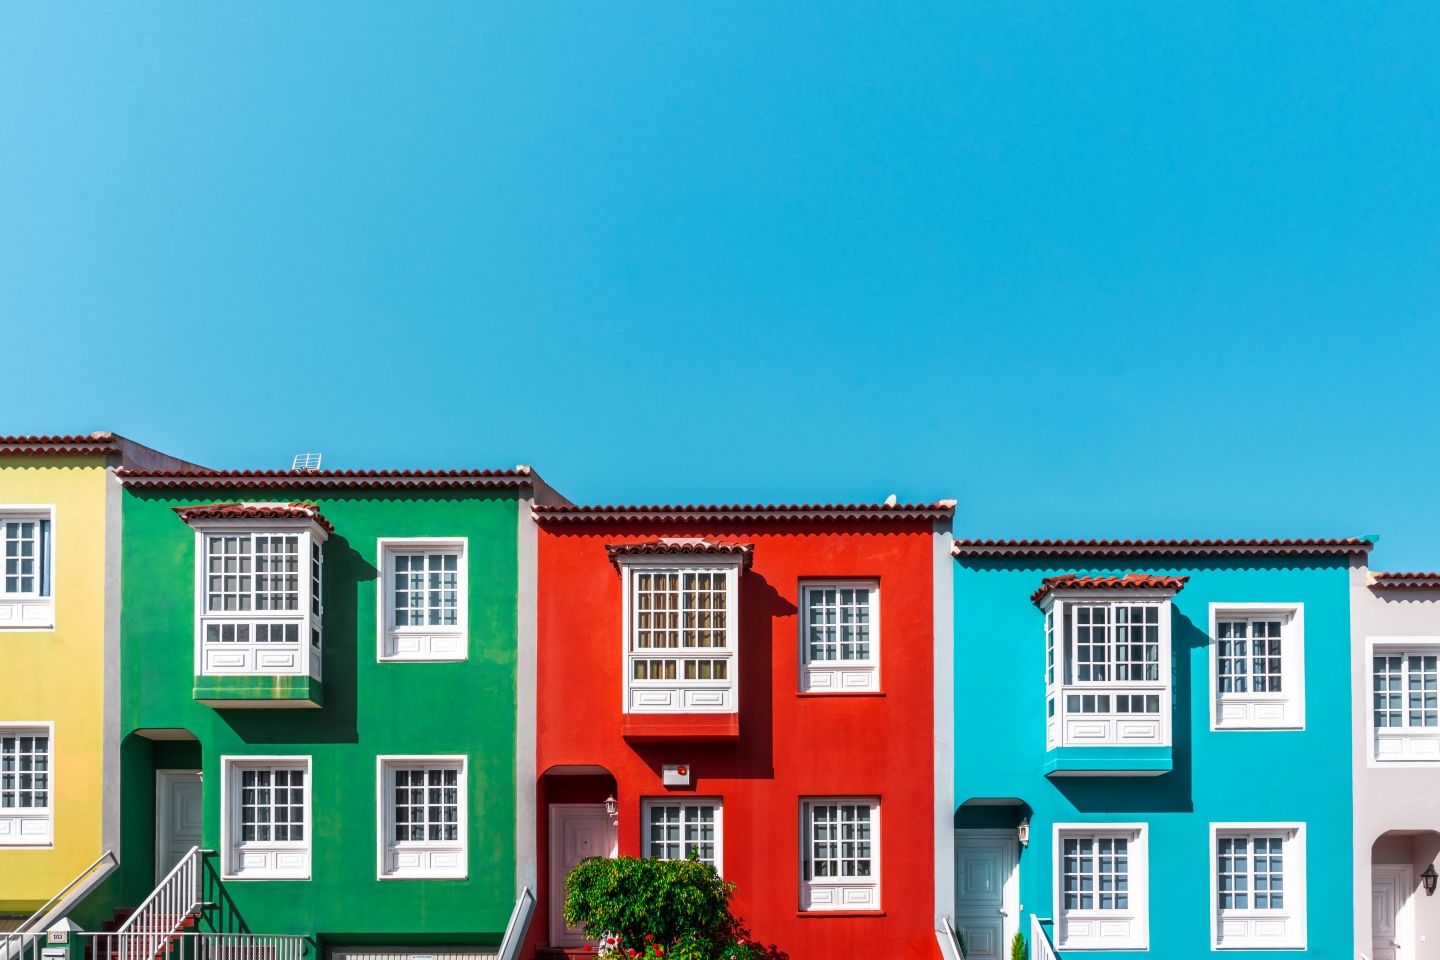 A row of colorful houses in Tenerife, Spain